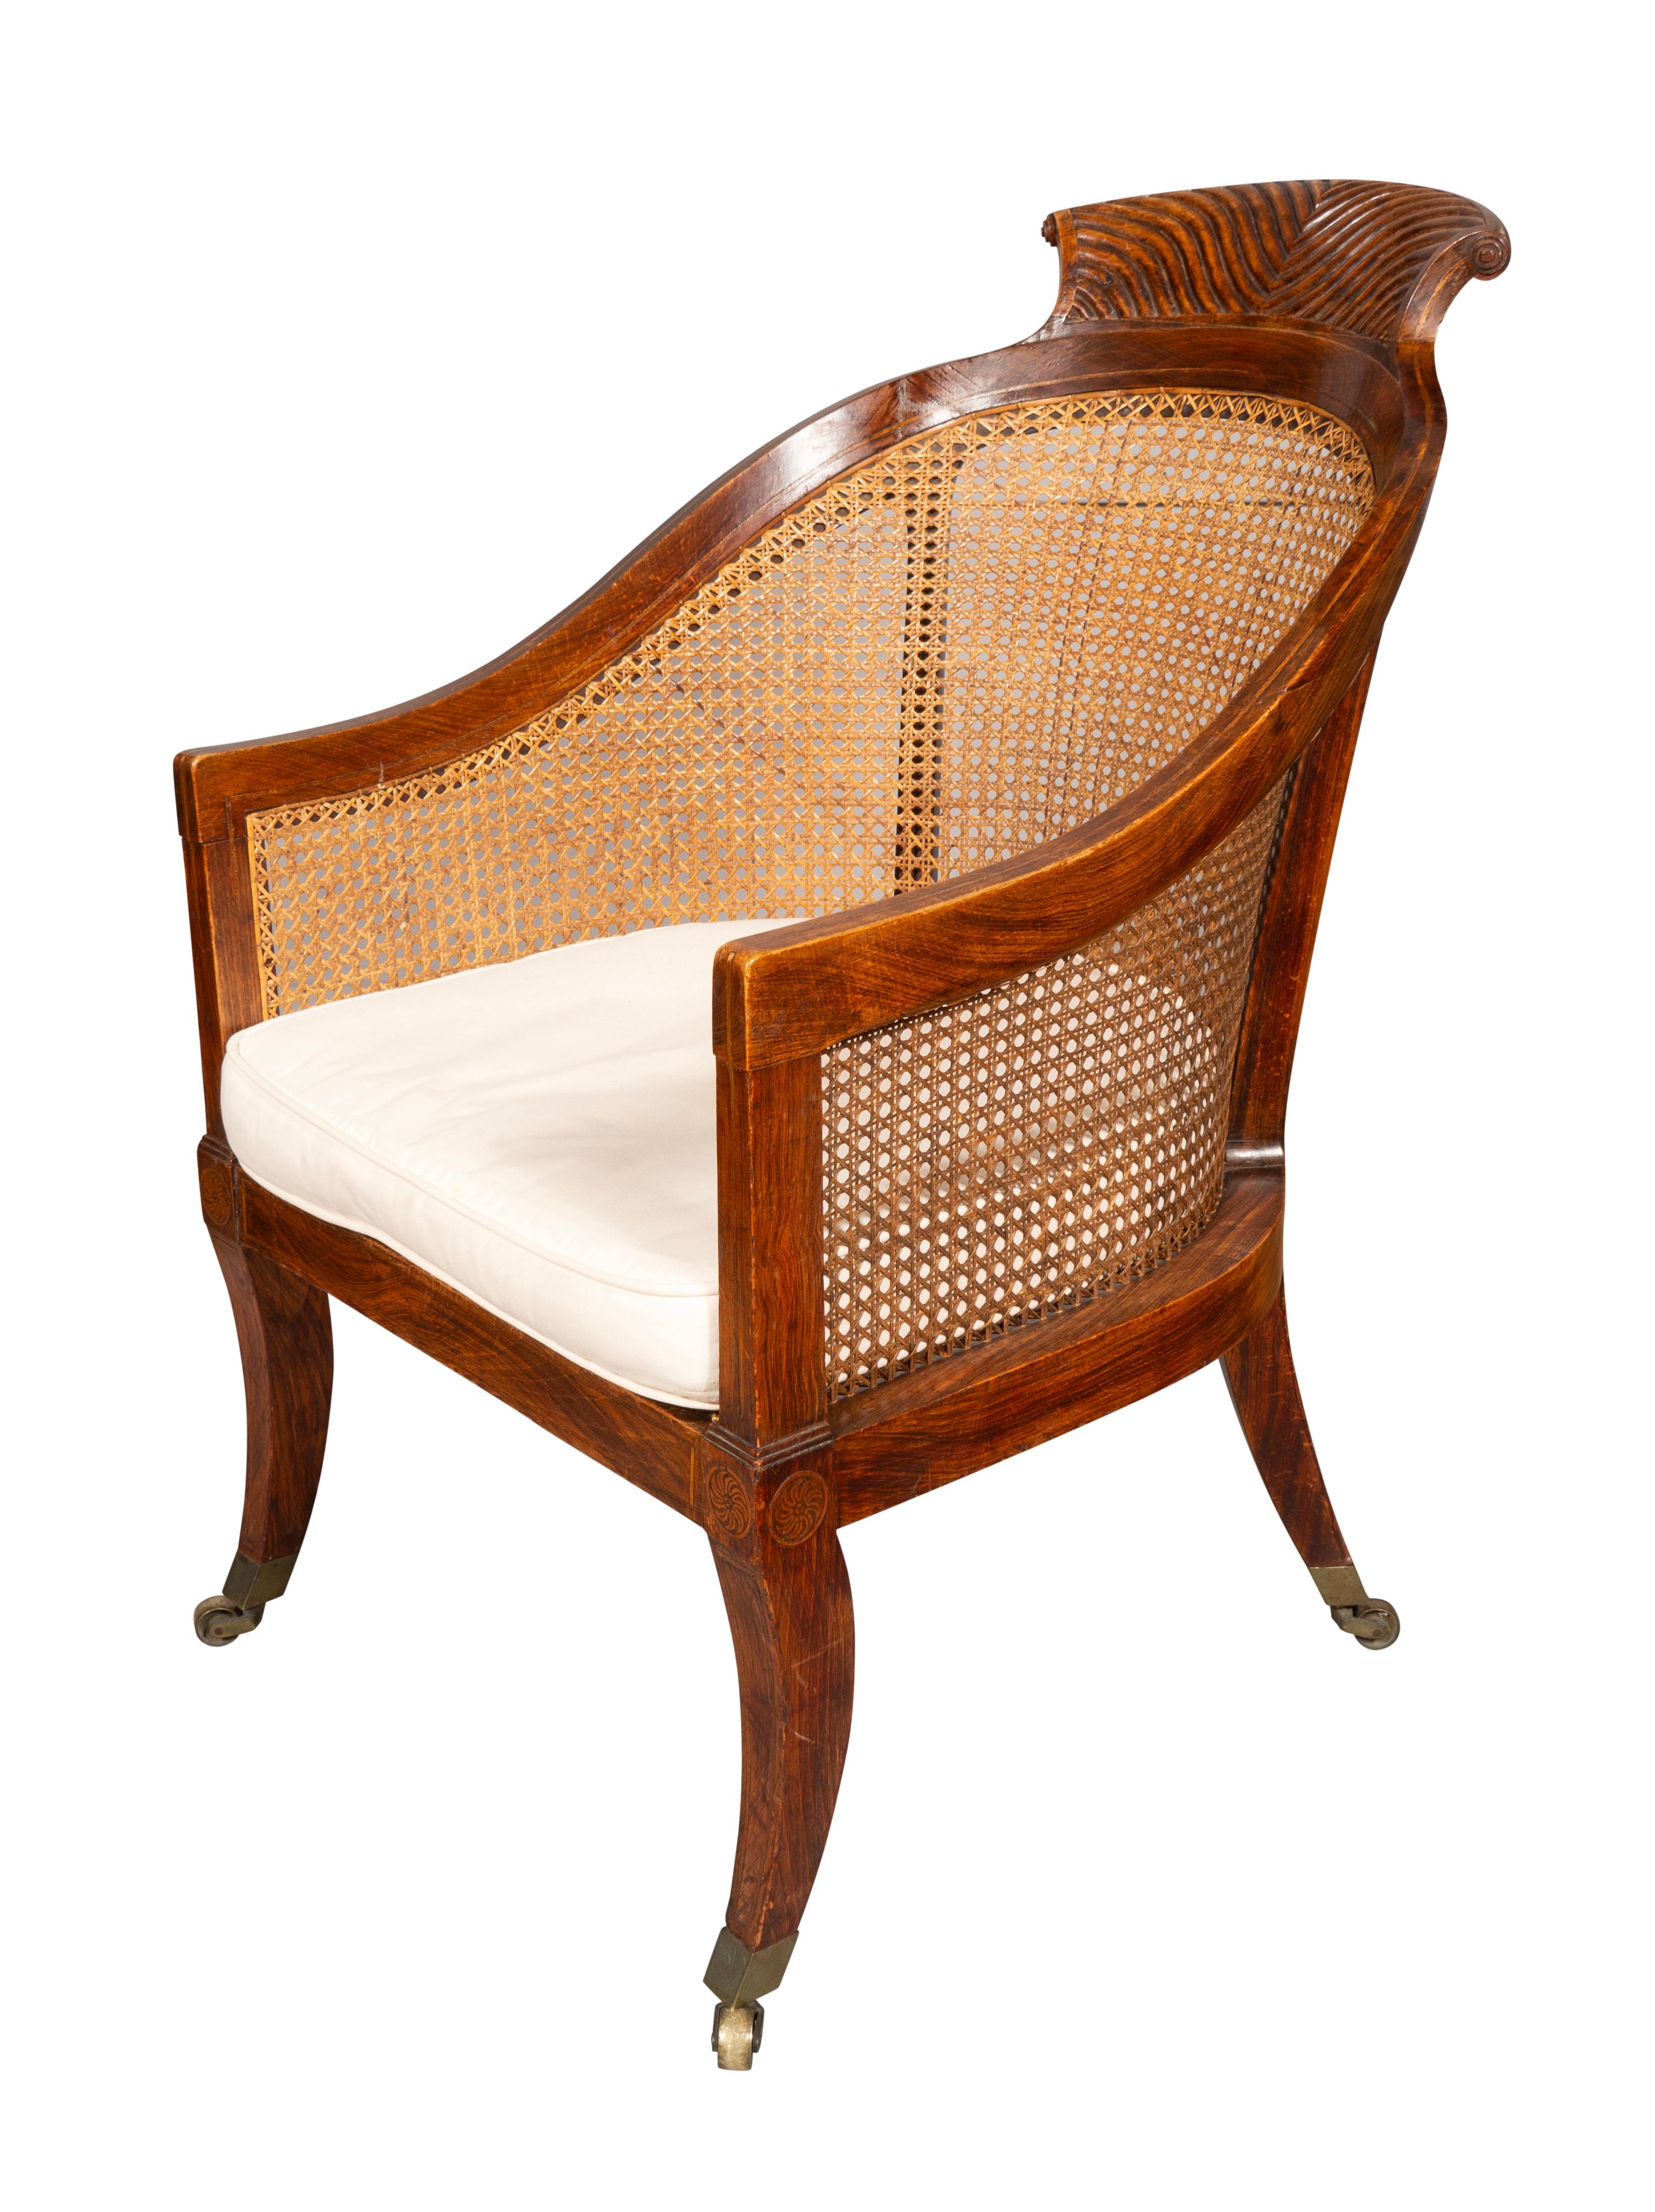 19th Century Regency Faux Rosewood Caned Tub Chair For Sale